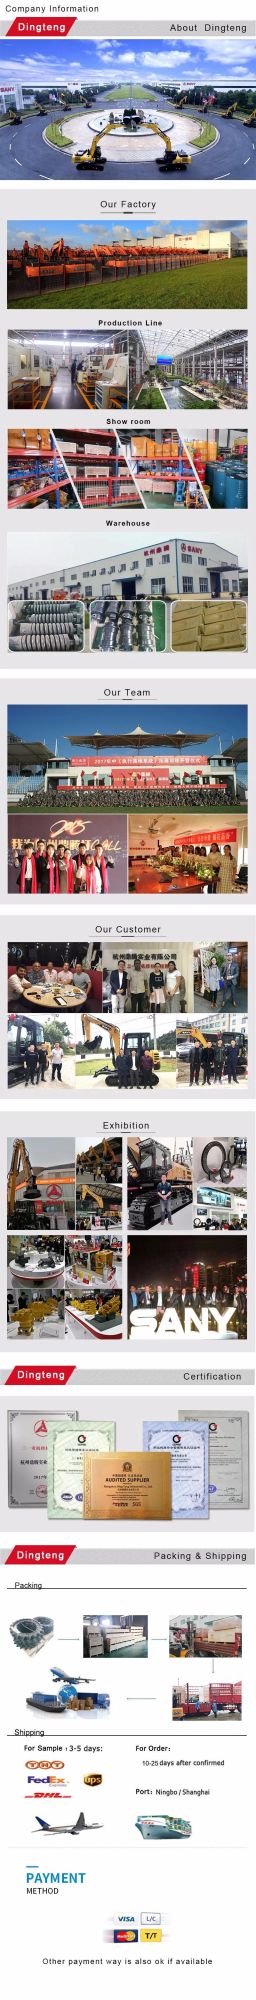 Best Seller Excavator Cabin From China